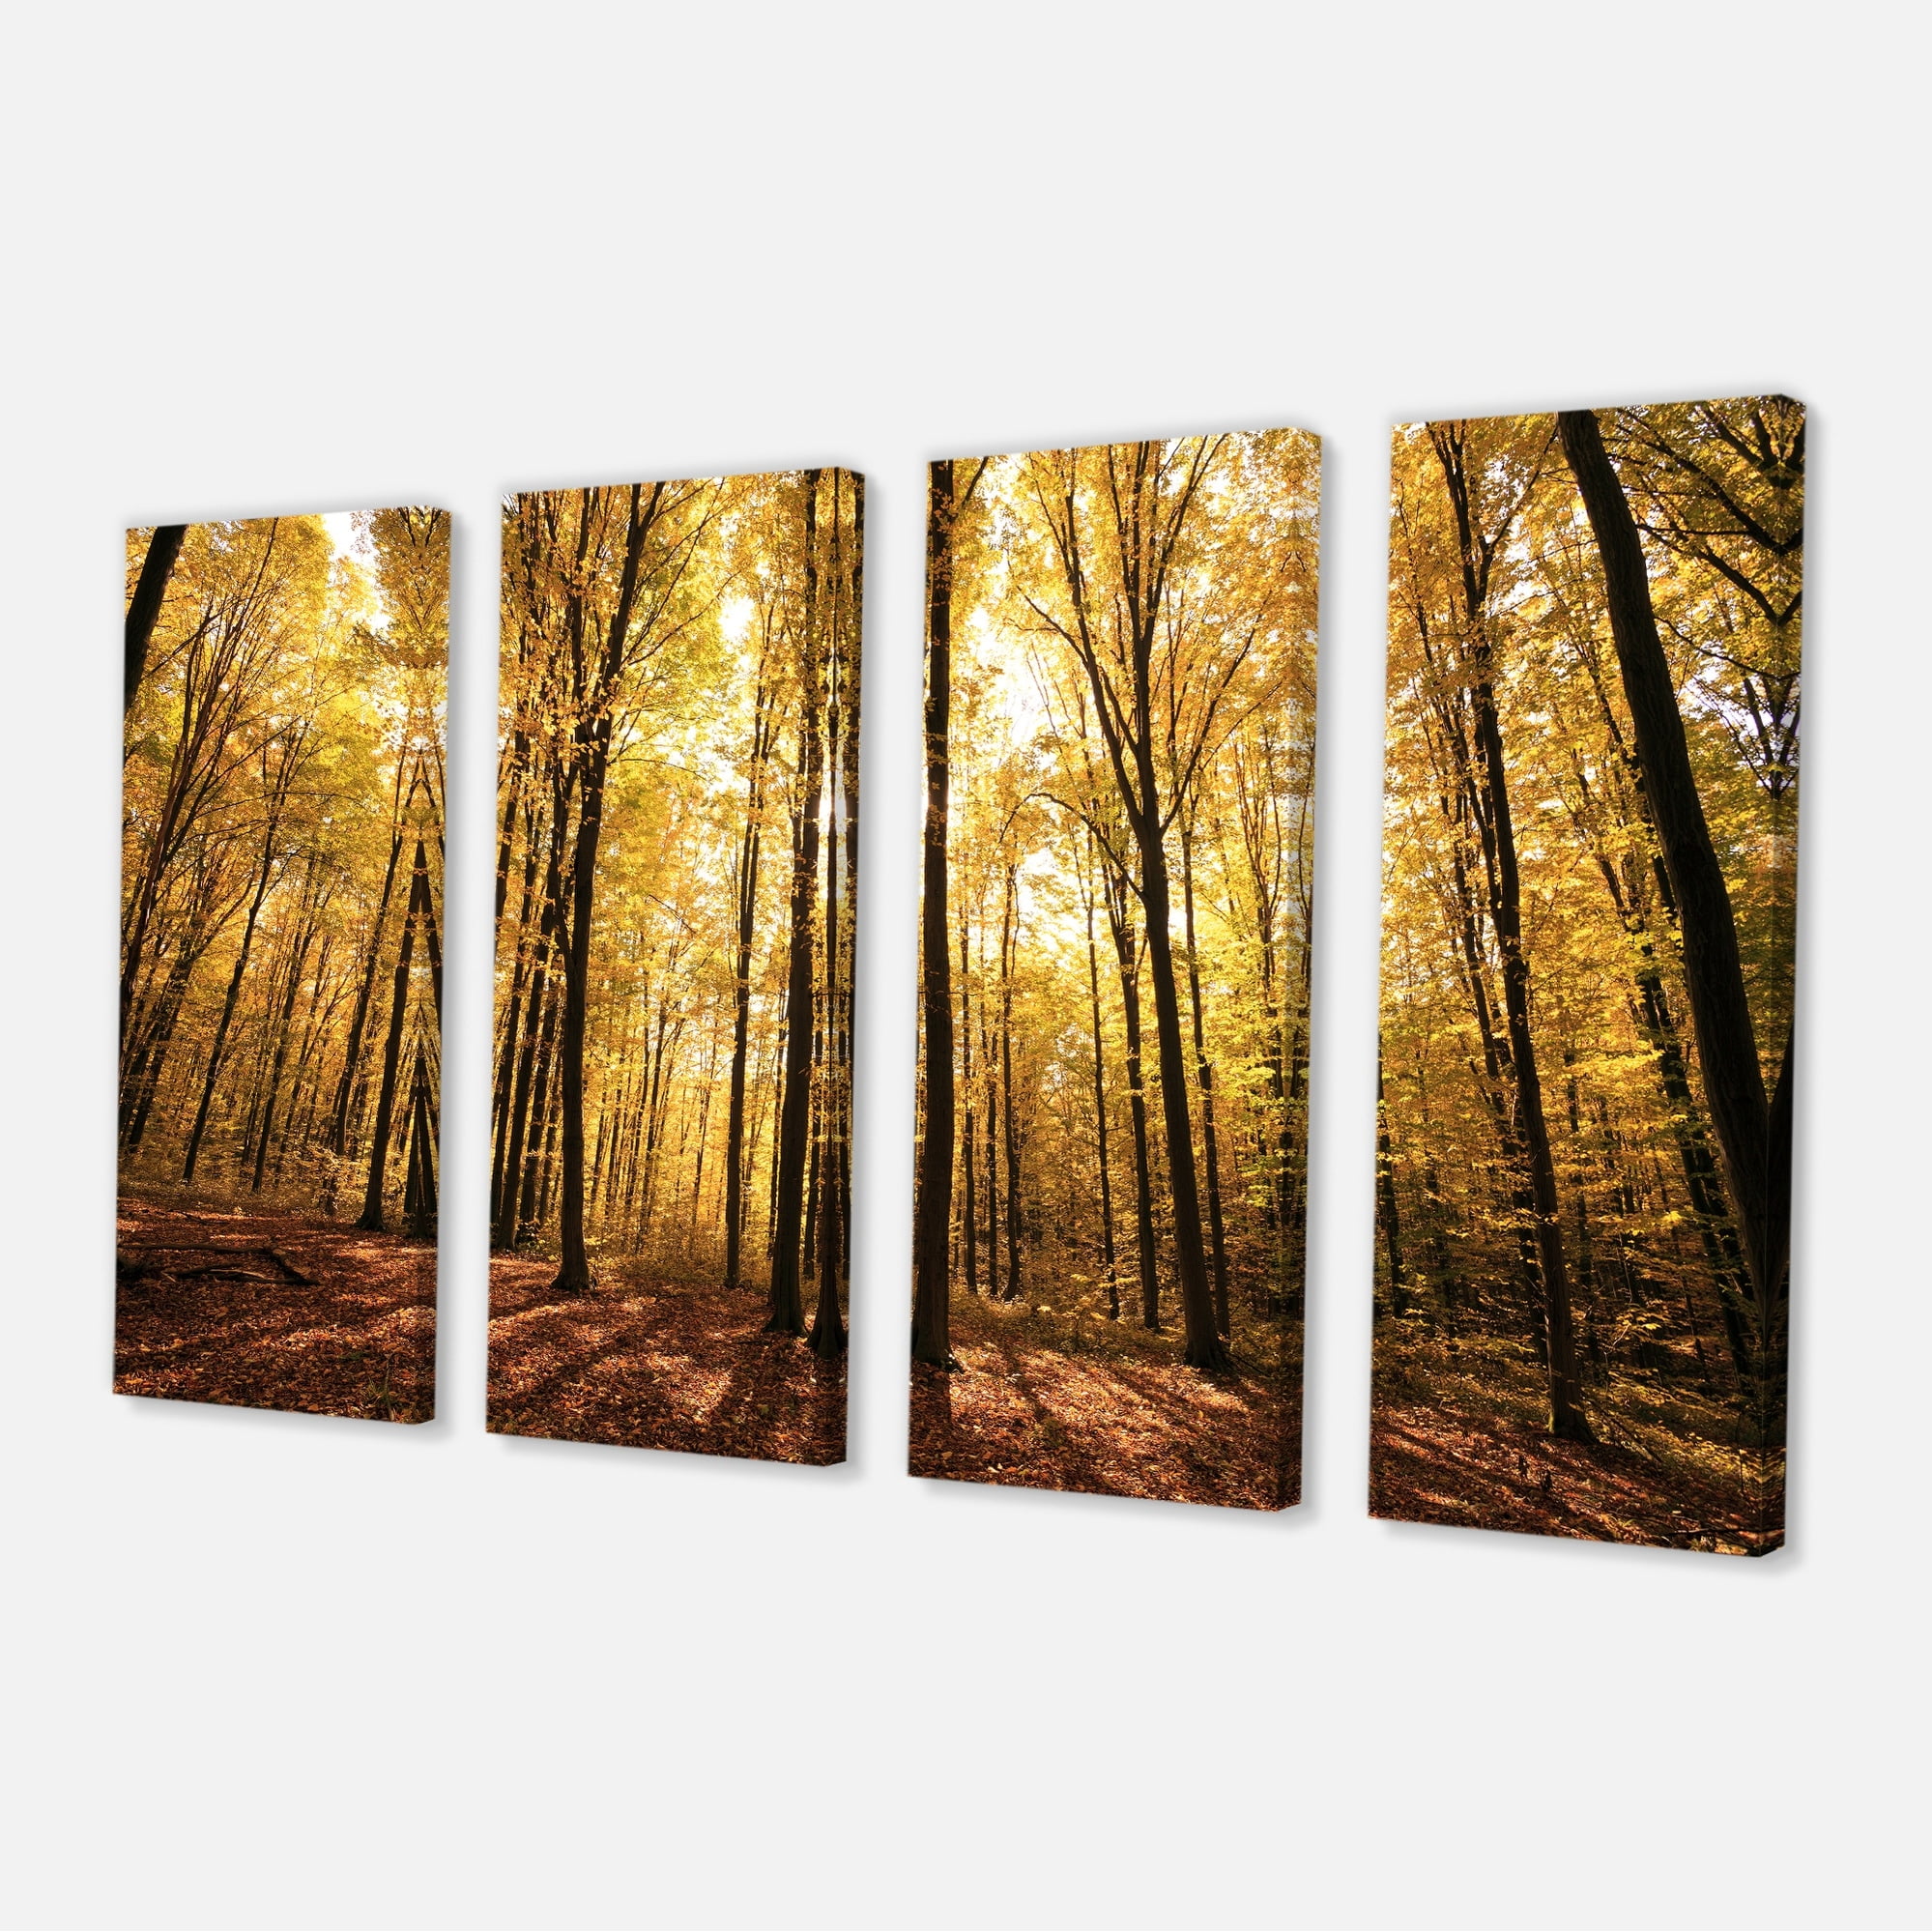 WODLAND FOREST LANDSCAPE CANVAS PICTURE PRINT WALL ART A650 